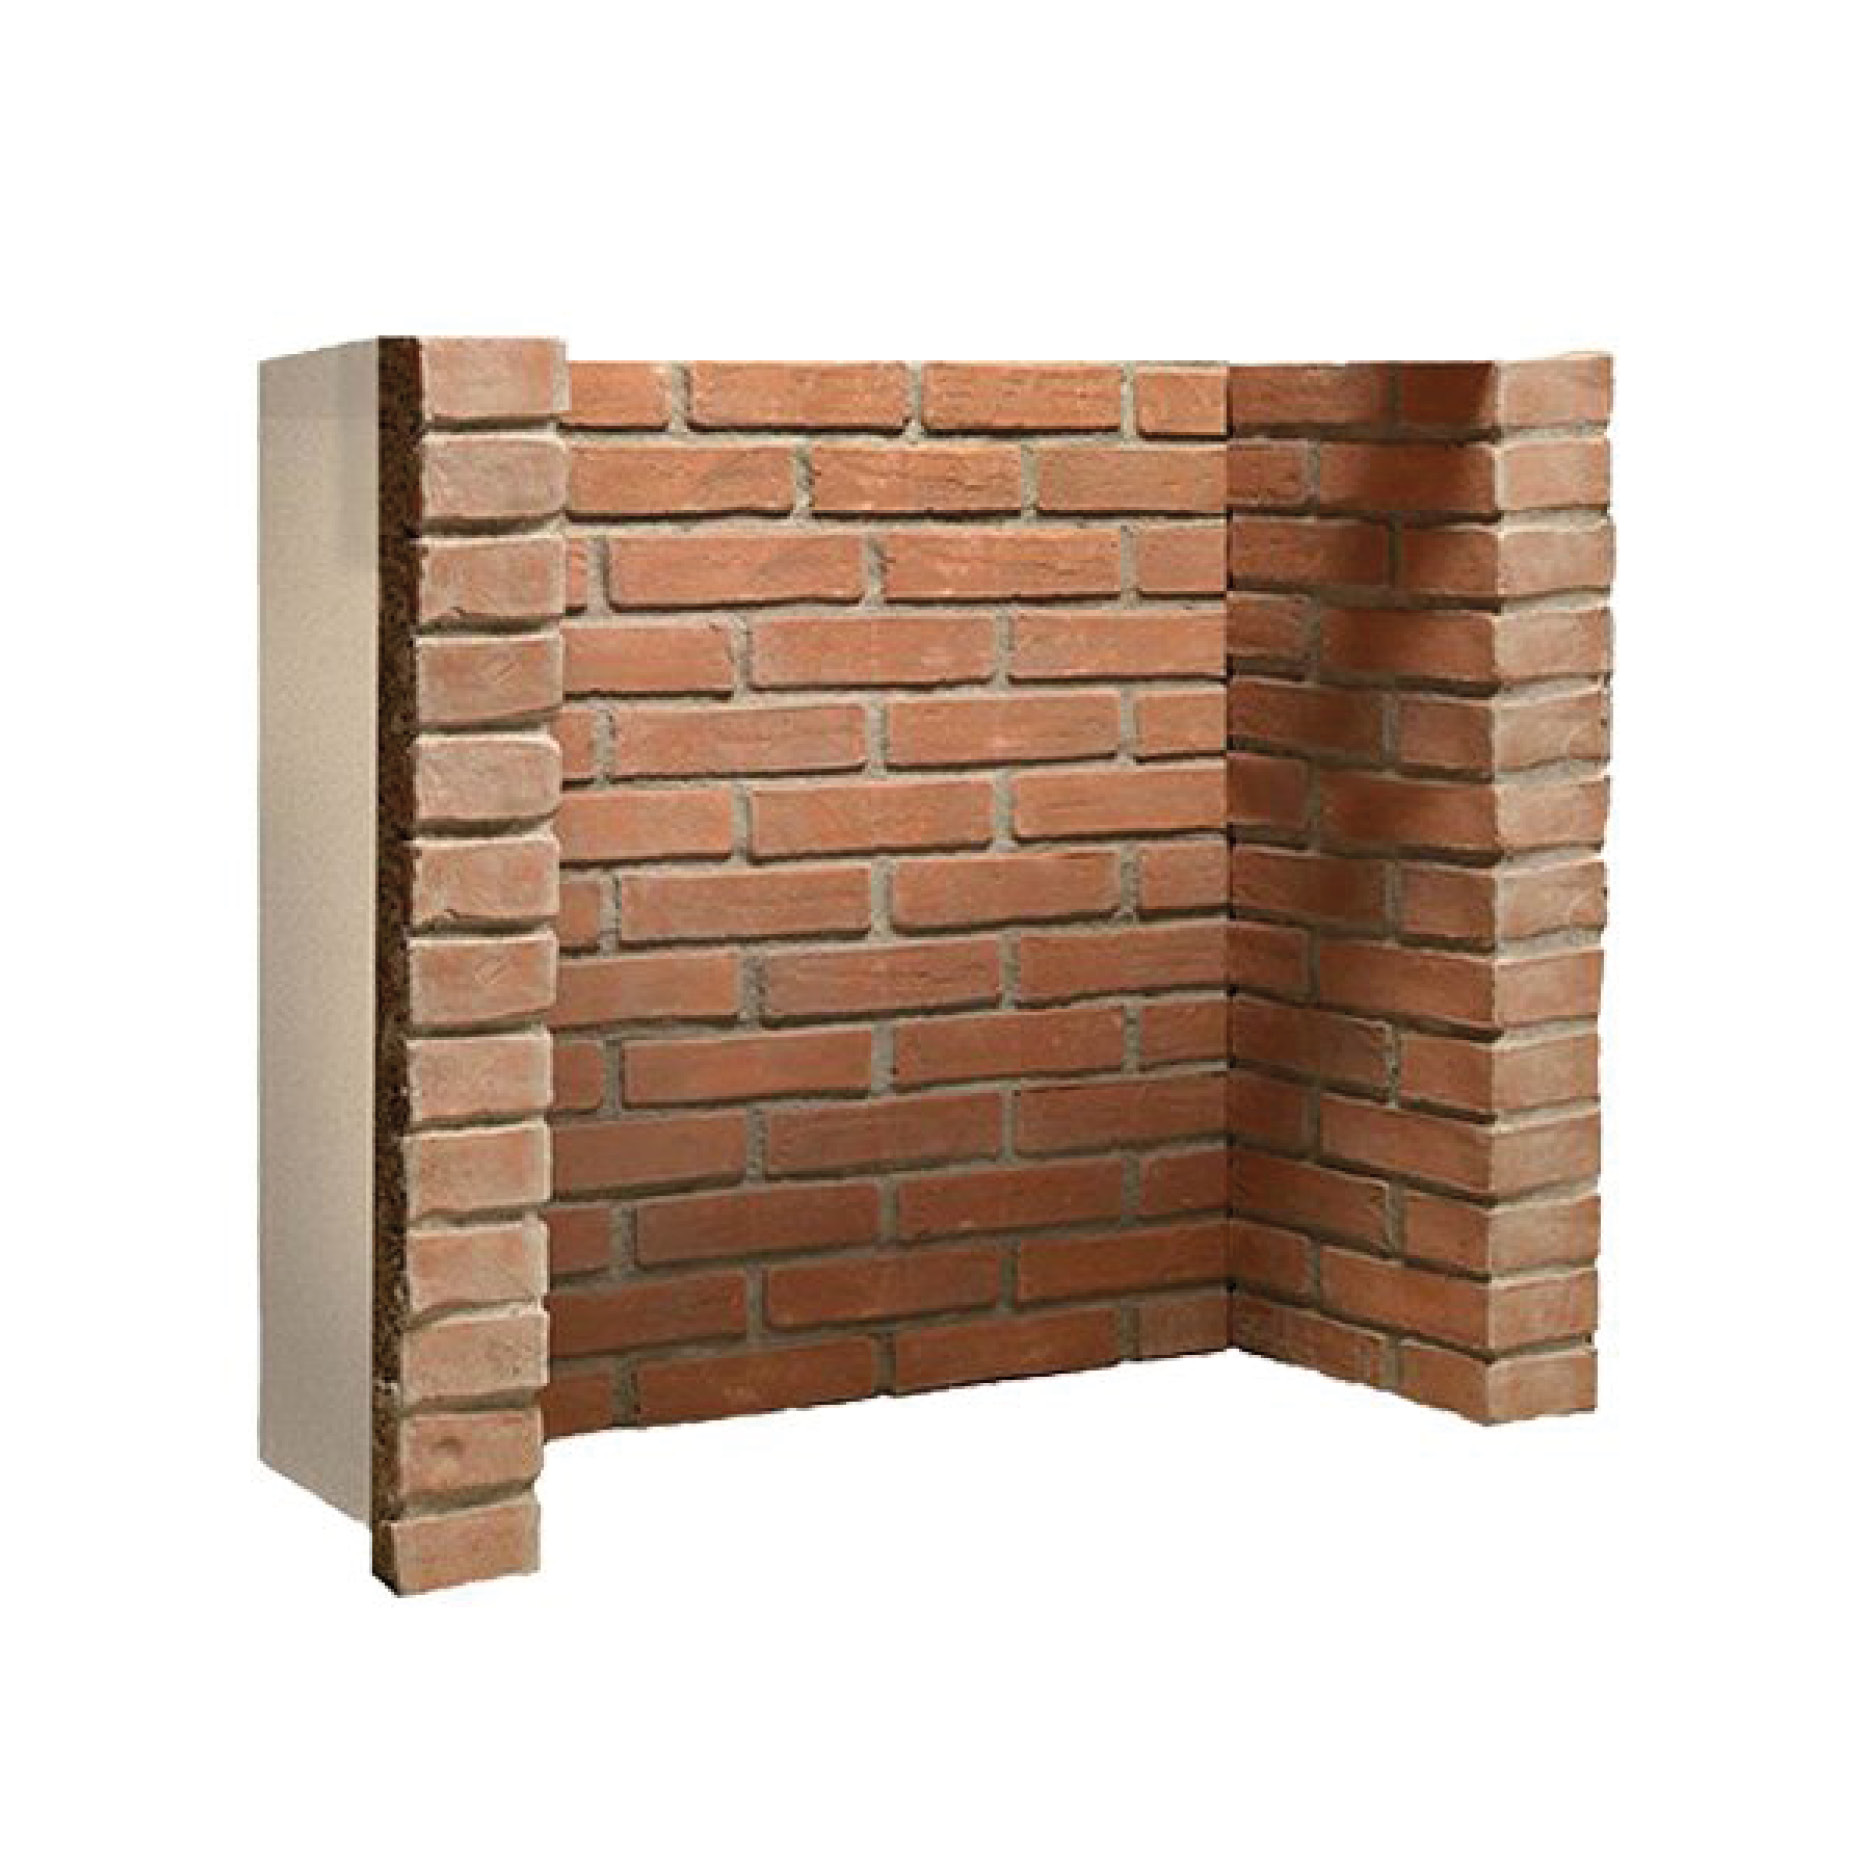 RUSTIC BRICK WITH FRONT RETURNS (NO ARCH)